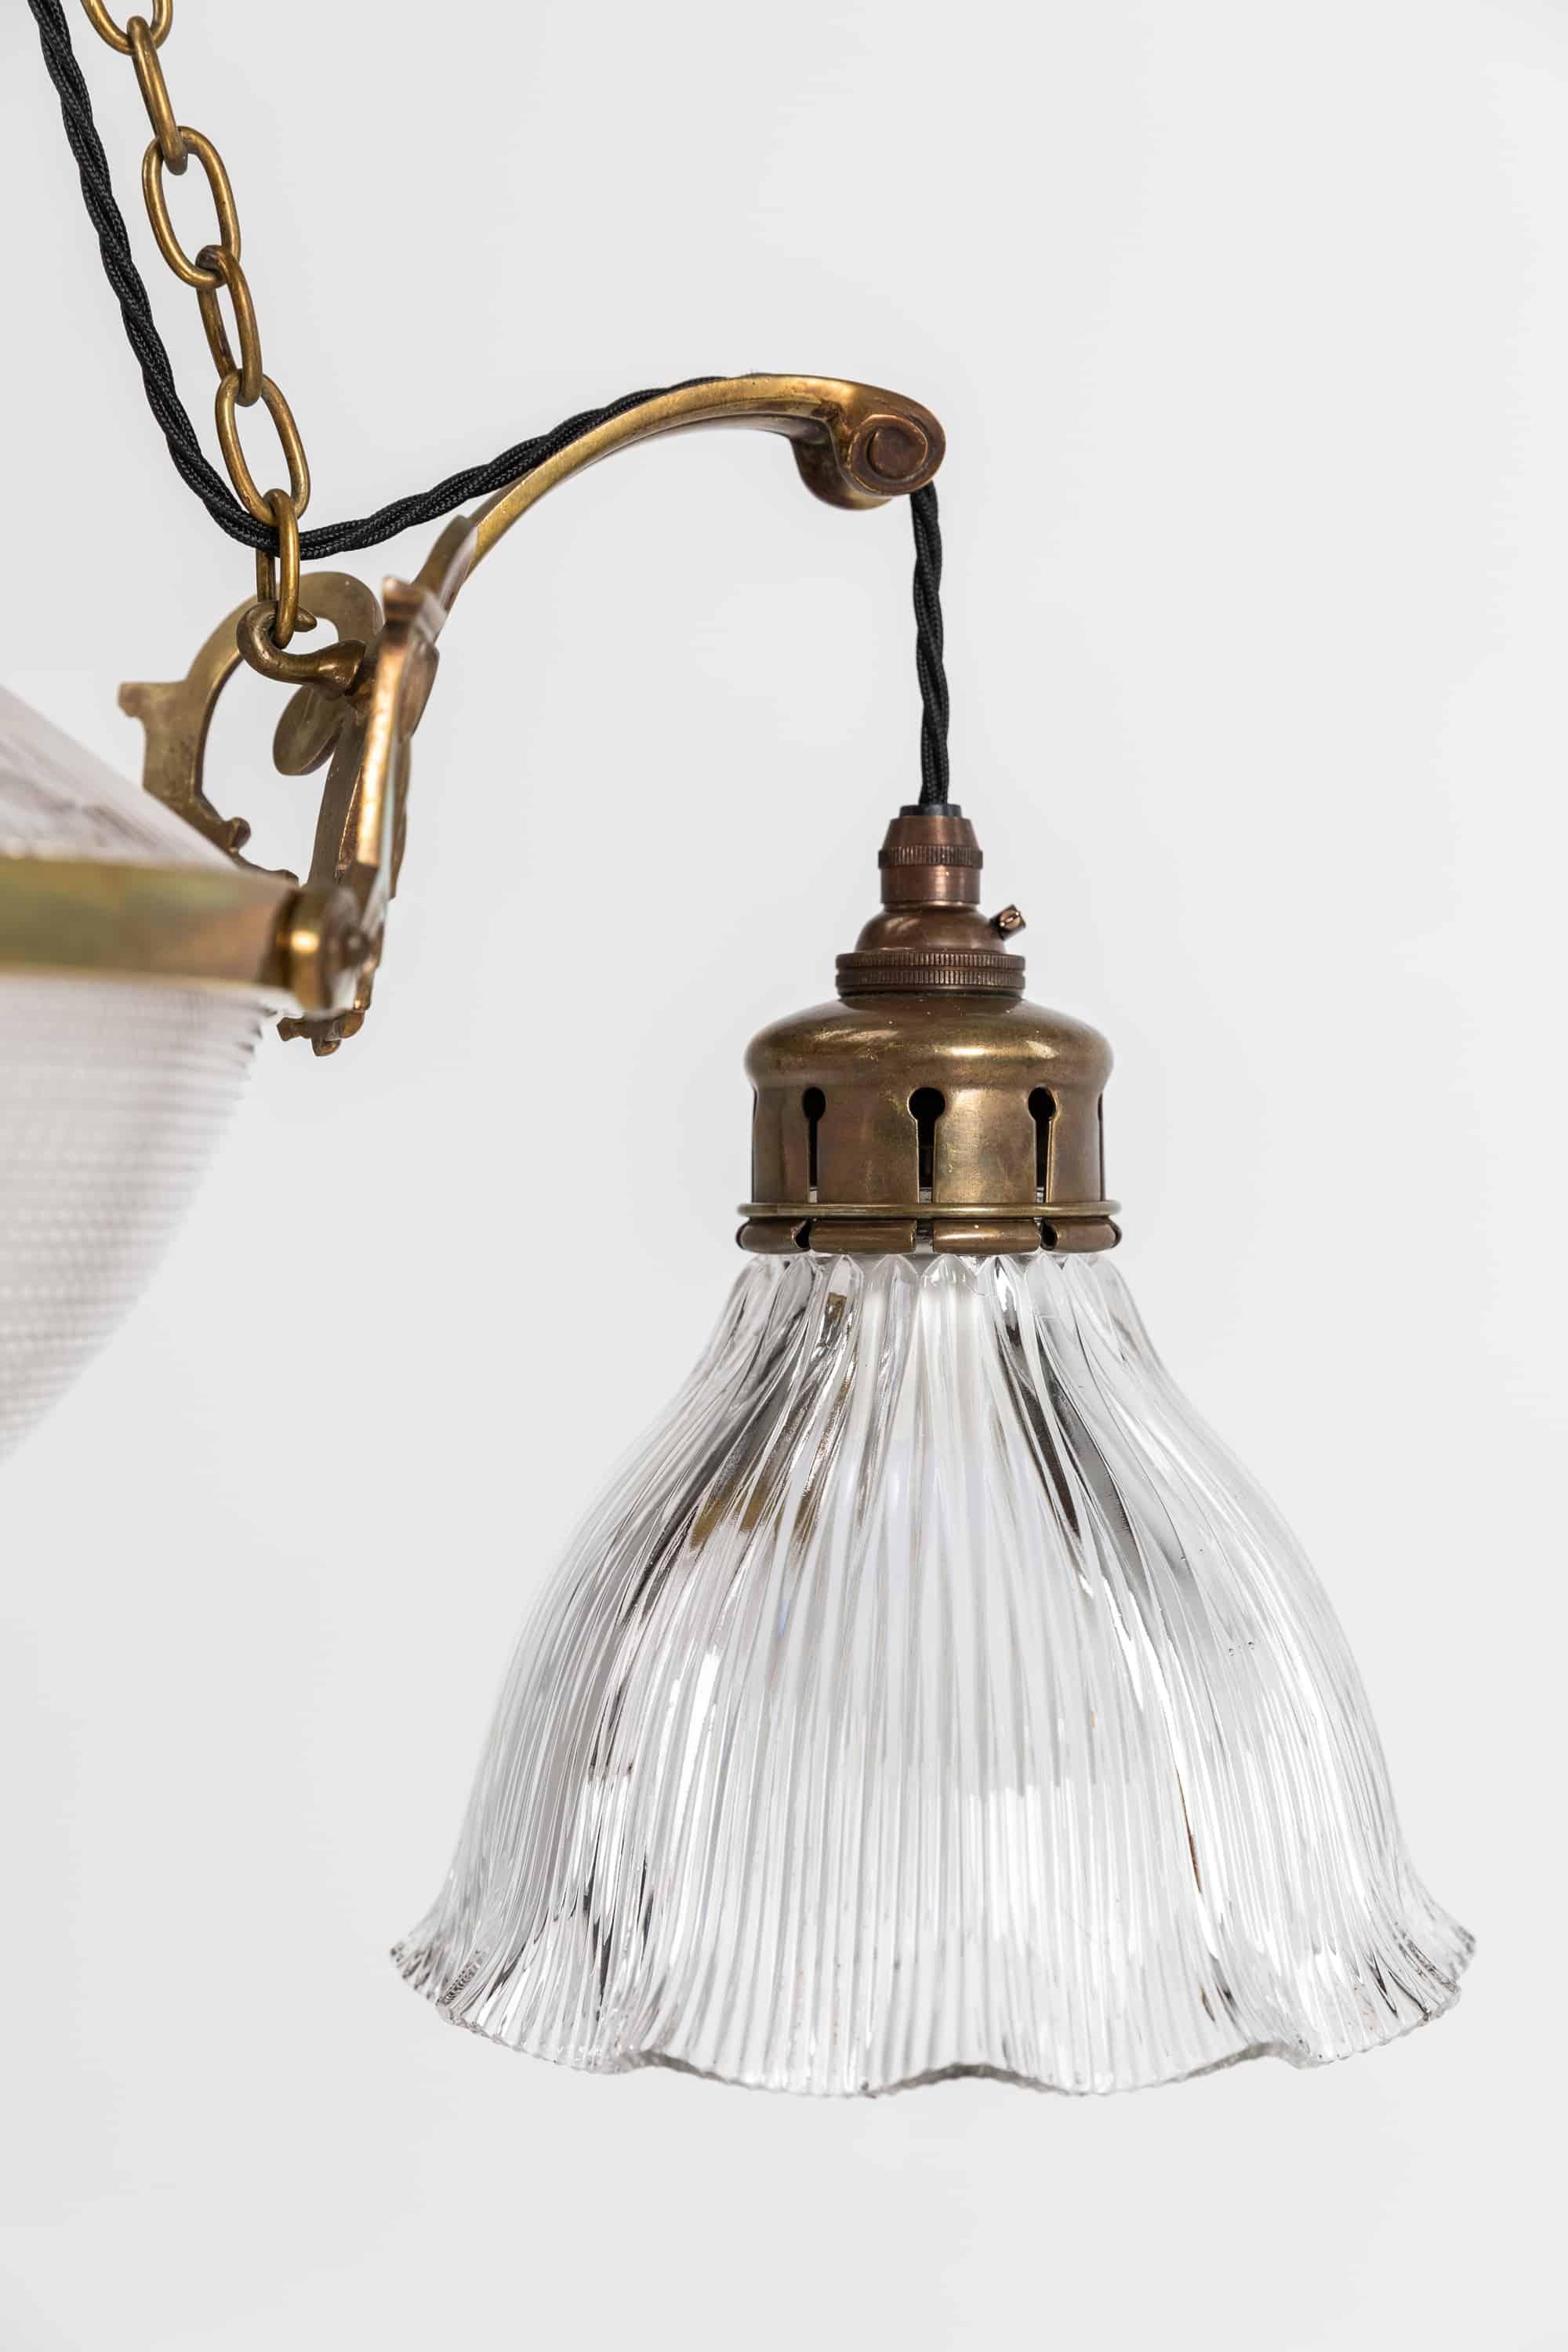 Holophane 'Stiletto' Prismatic Glass Cluster Chandelier Light Pendant, c.1915 In Fair Condition In London, GB